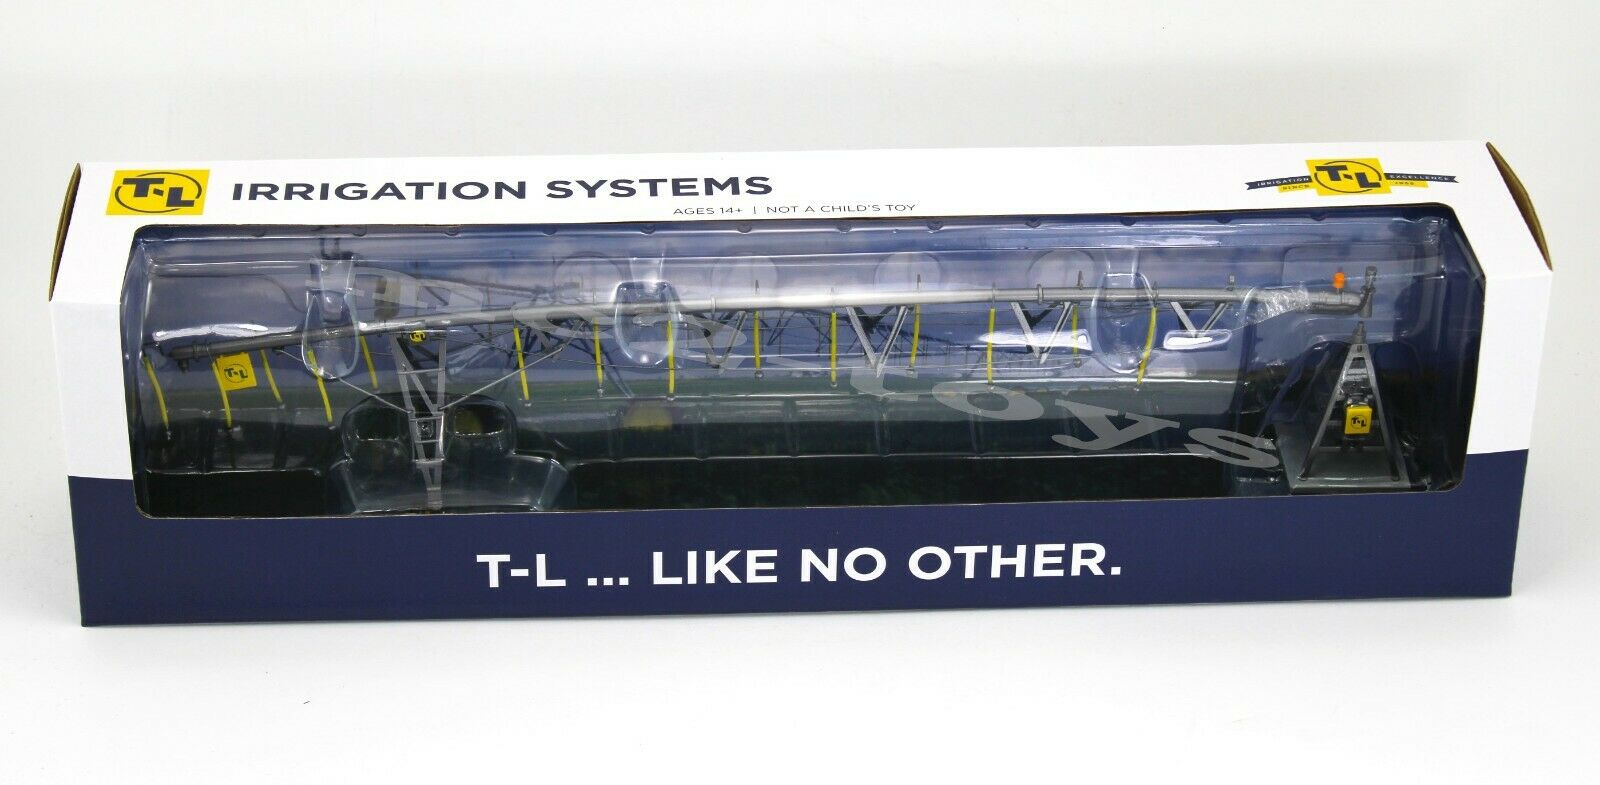 2020 DCP by First Gear 1:64 T-L IRRIGATION SYSTEMS *CENTER PIVOT* BRAND NEW!